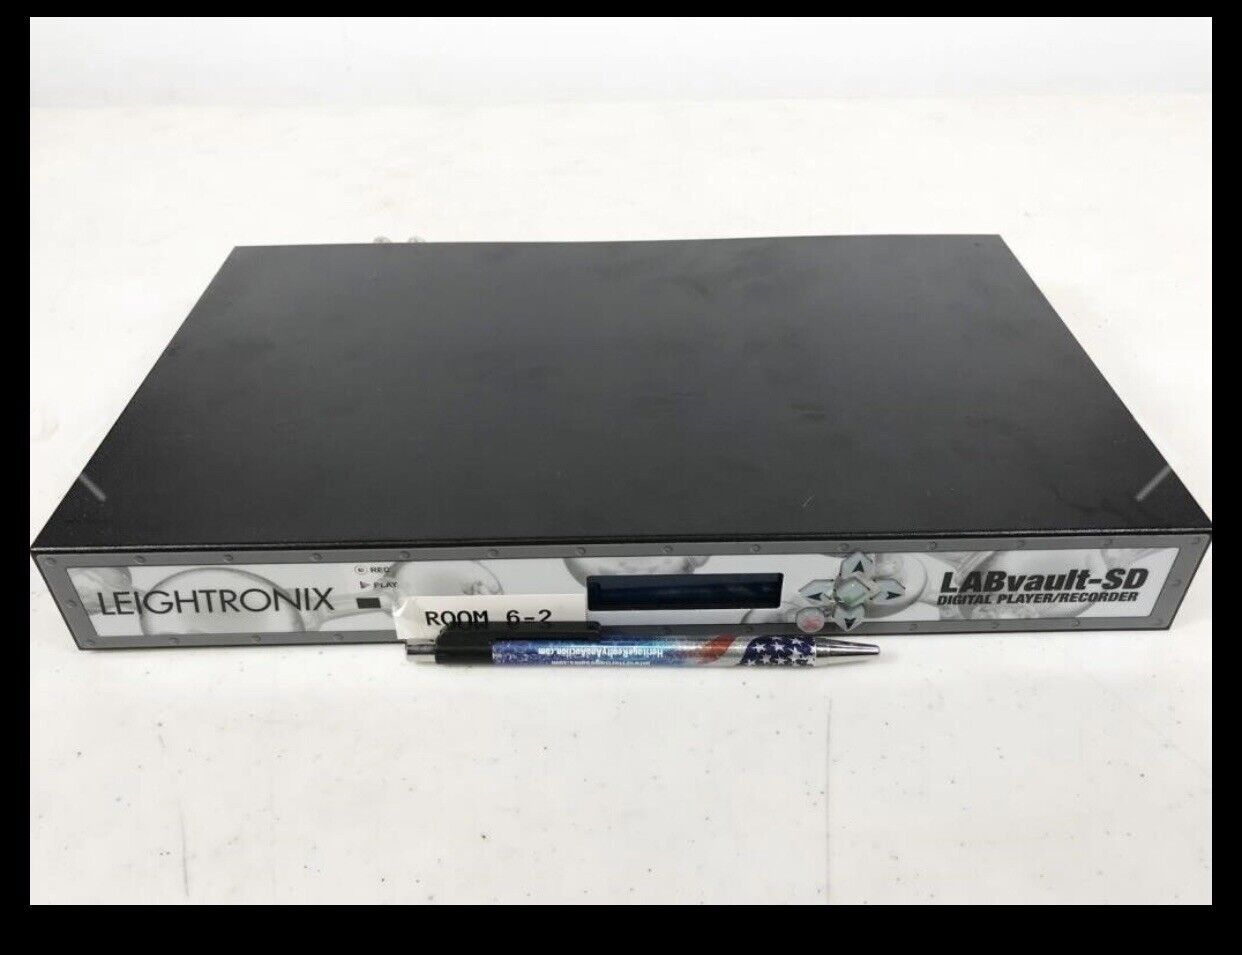 Leightronix Labvault Sd Mpeg2 Network Recorder / Player